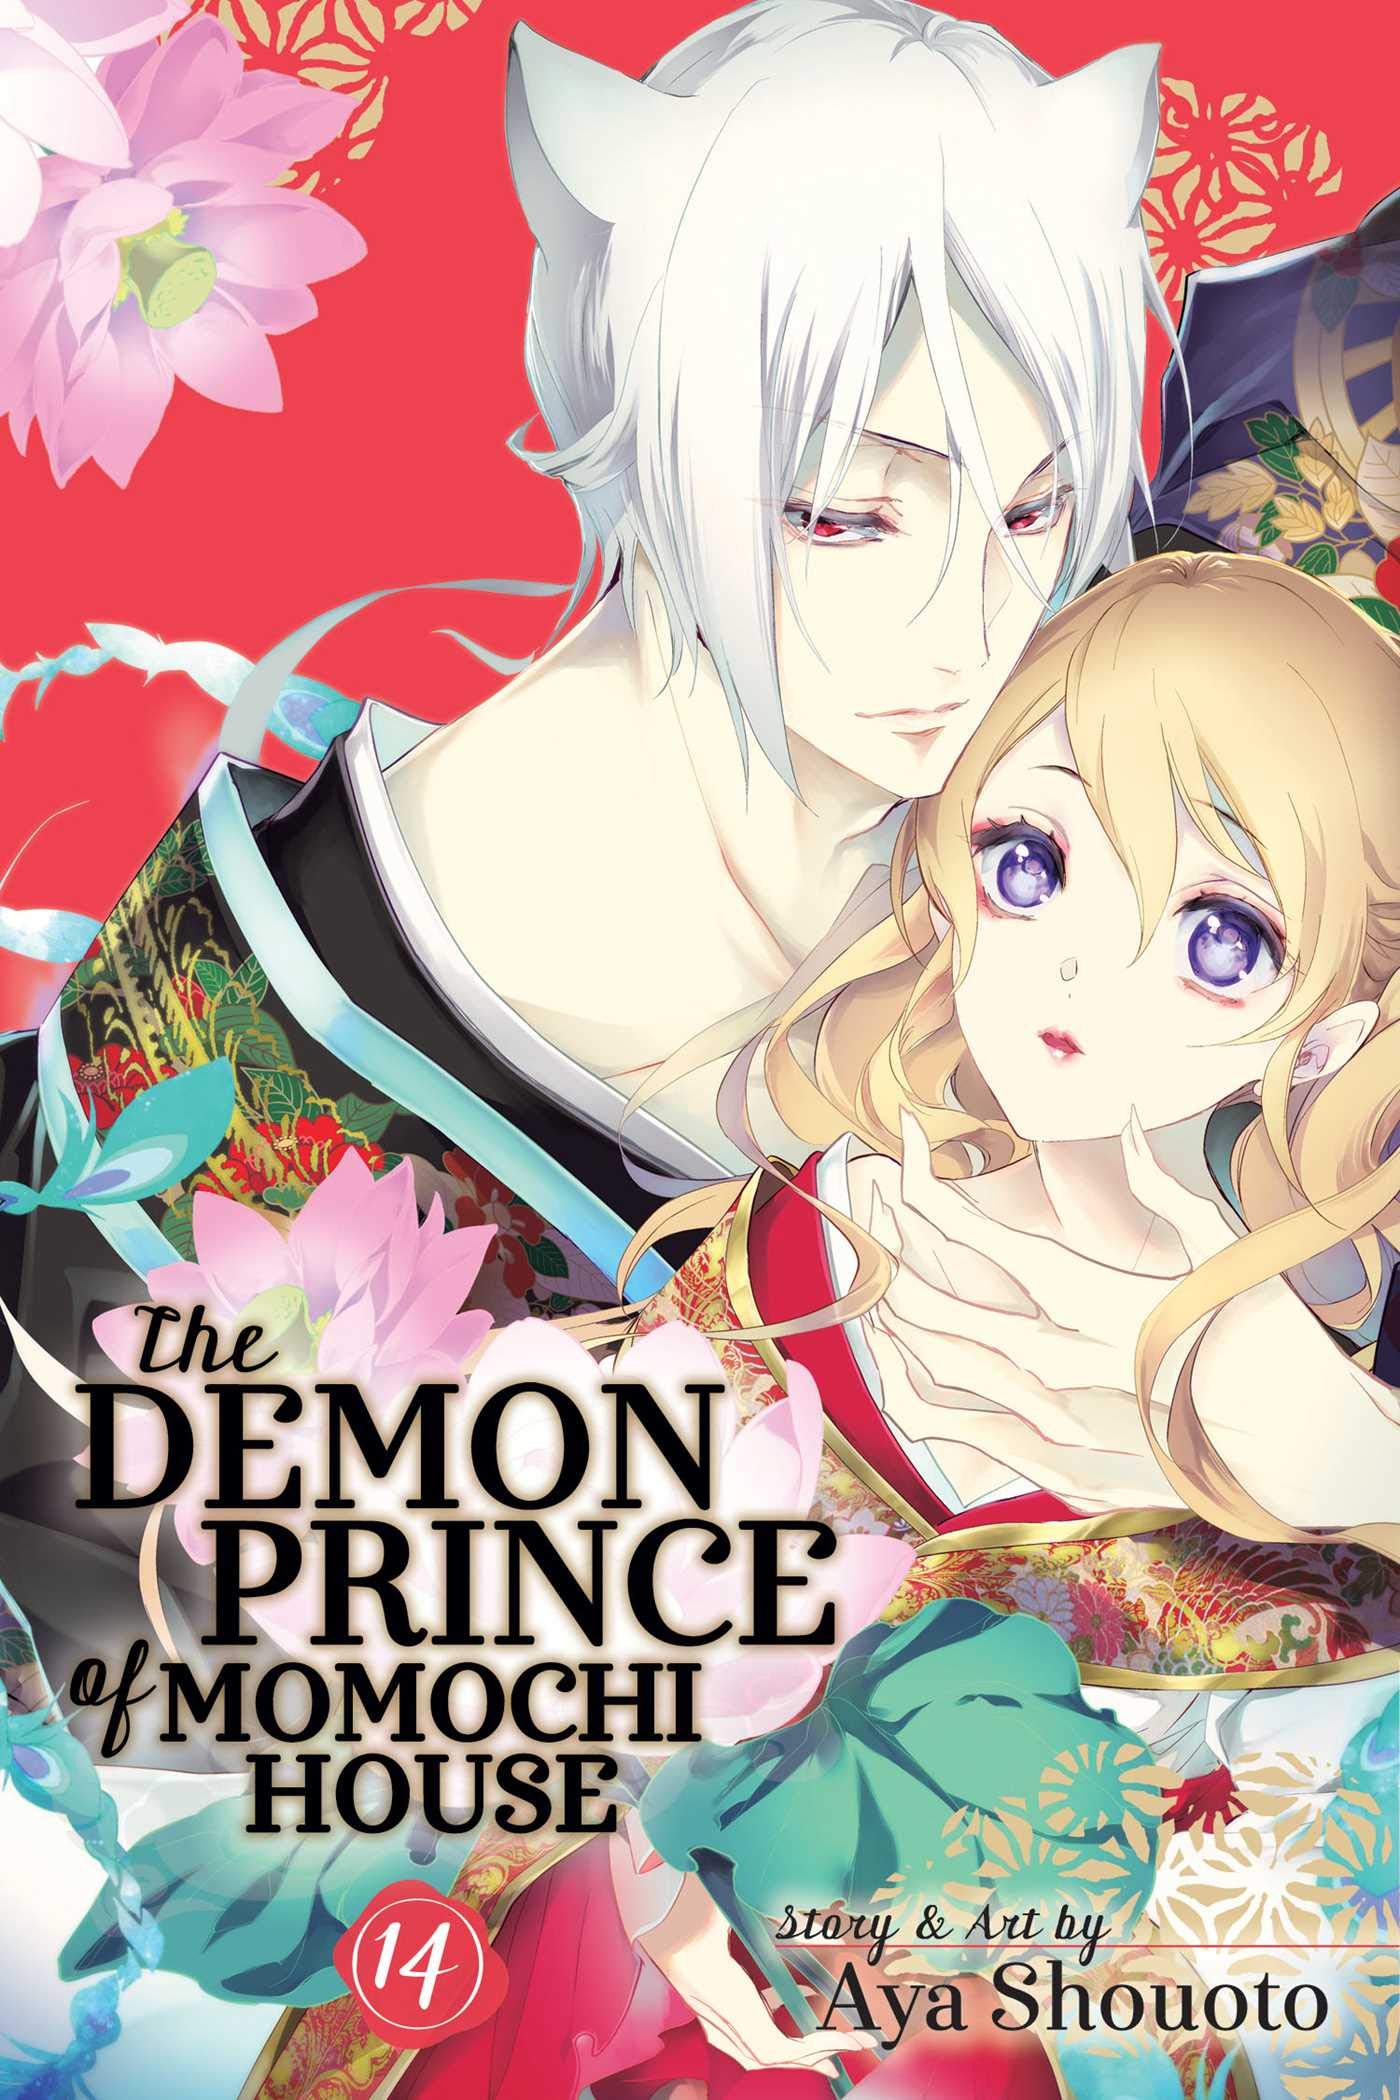 The Demon Prince of Momochi House - Volume 14